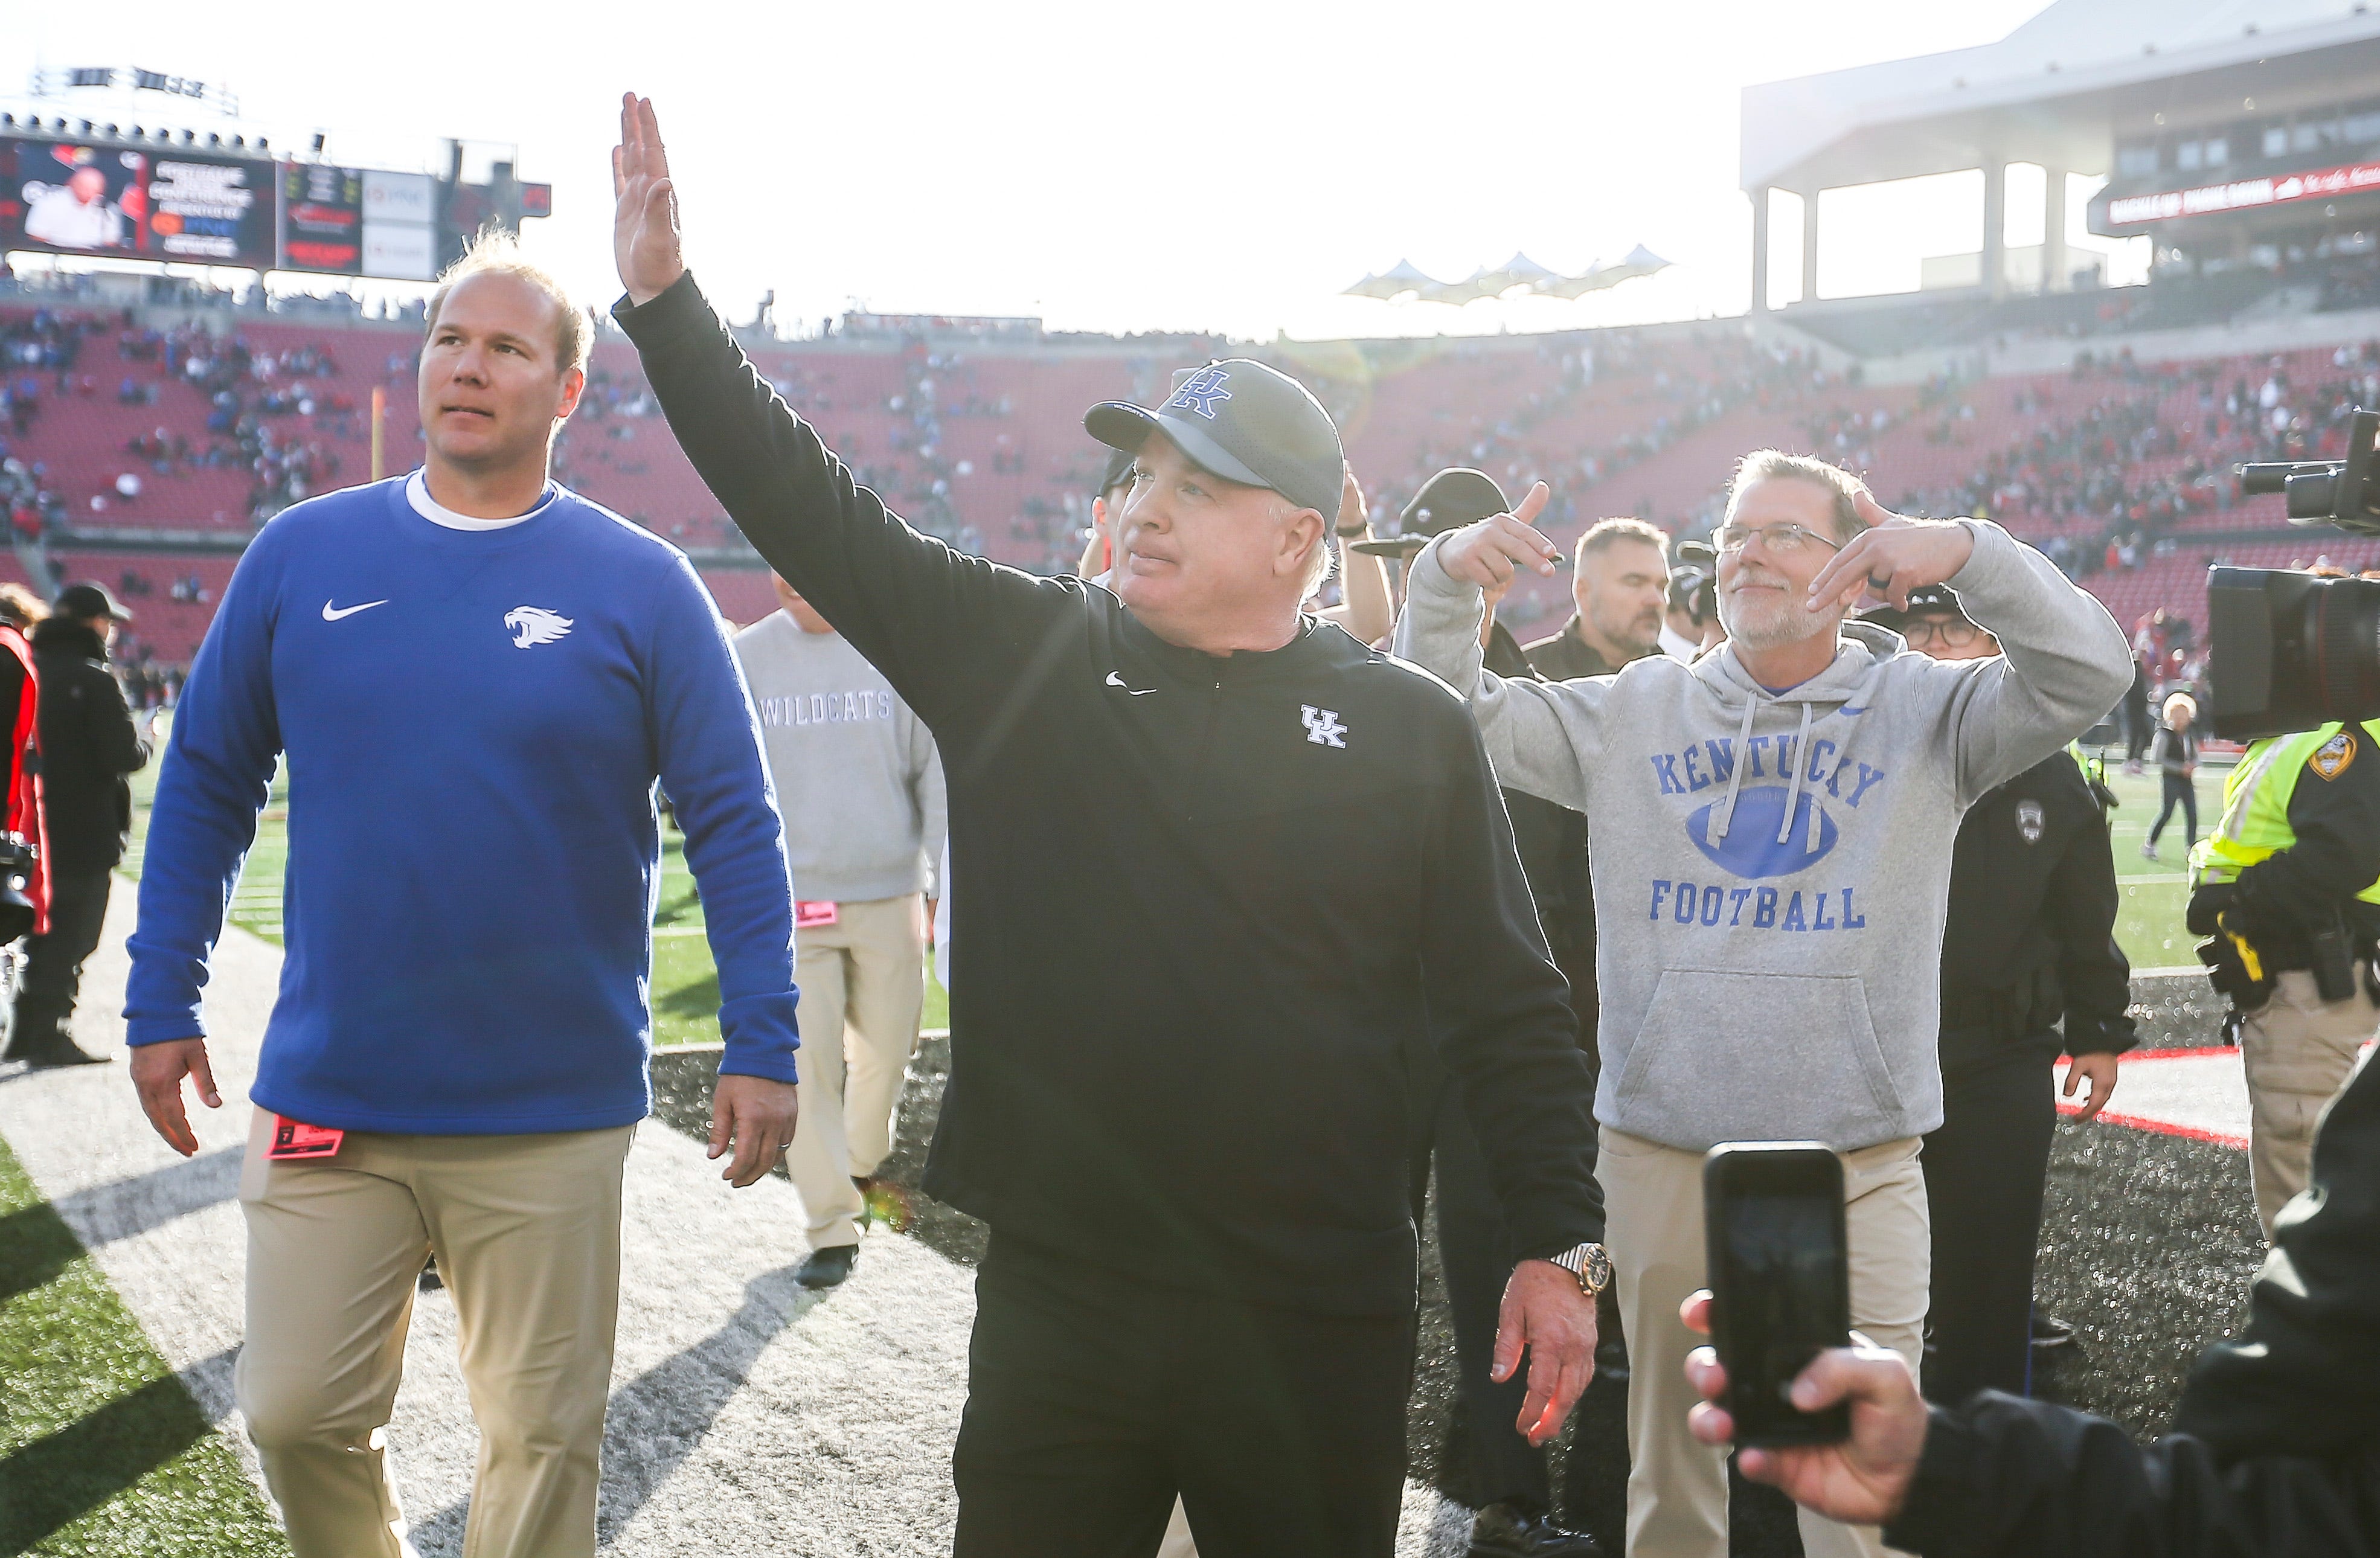 mark stoops addresses rumors about him leaving for texas a&m: 'i couldn't leave' kentucky